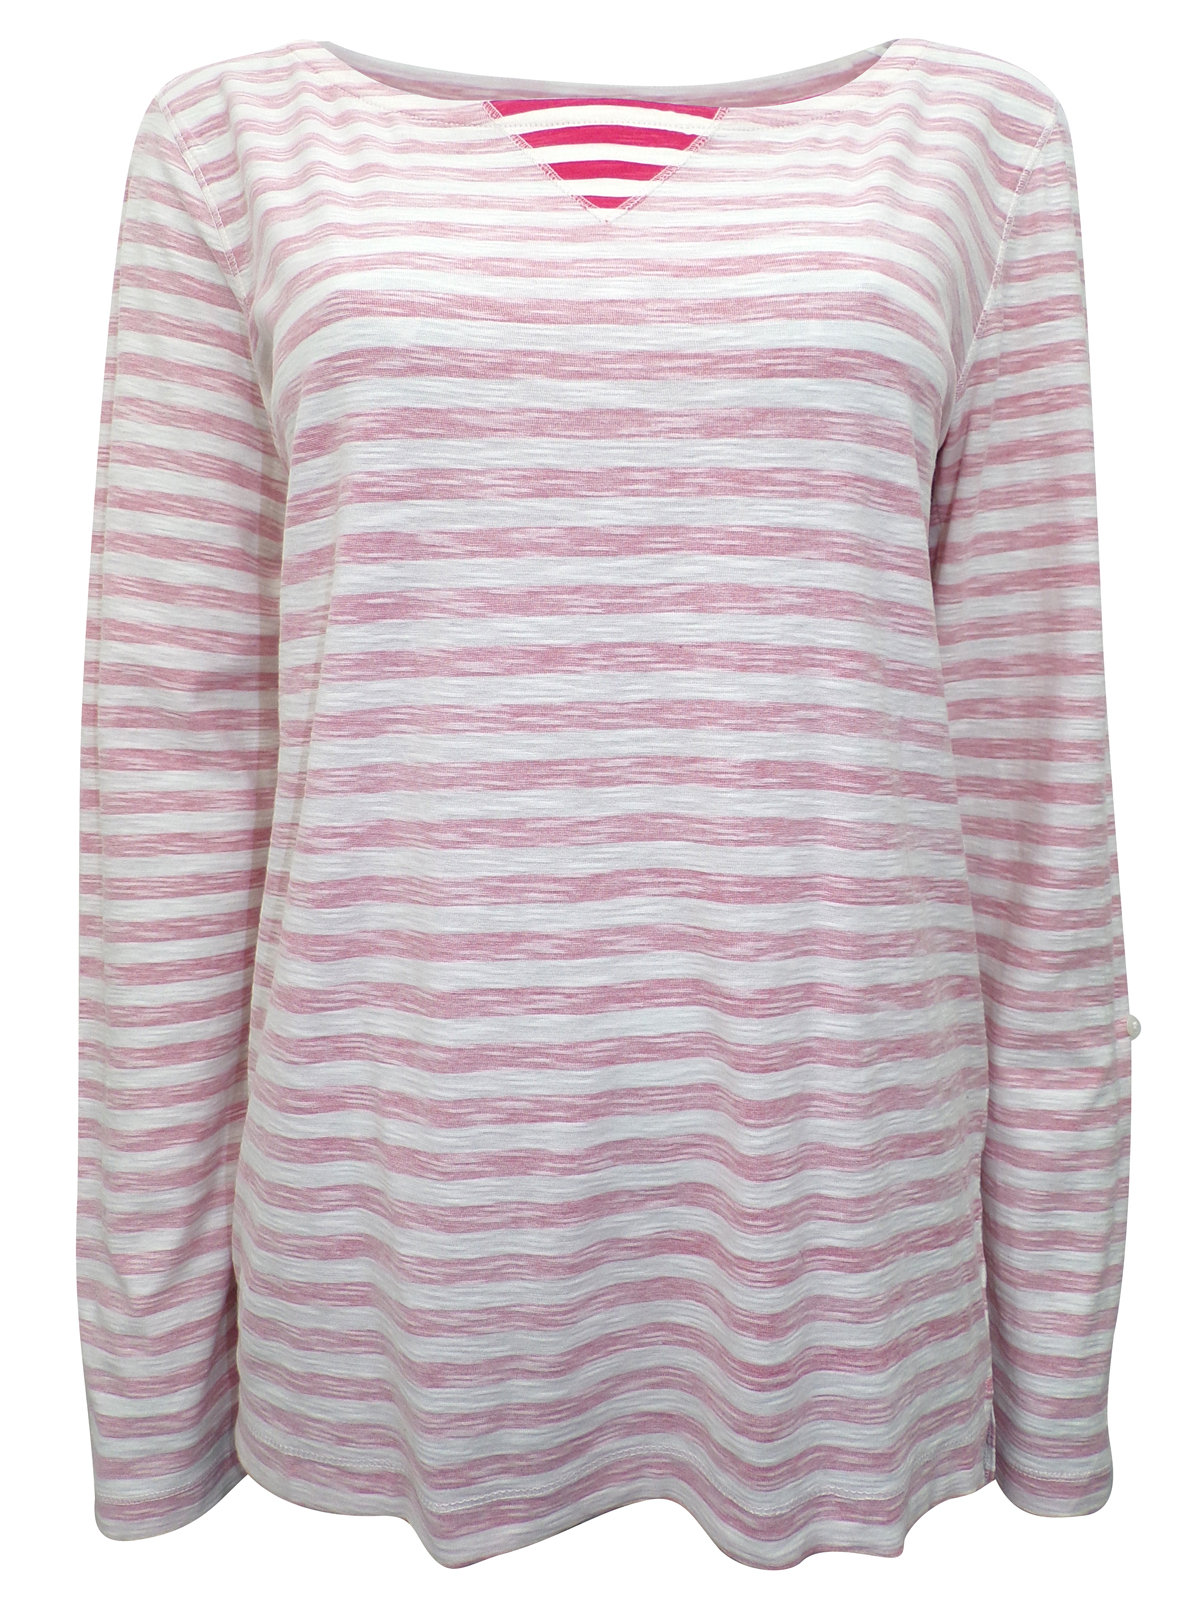 Gomma - - Gomma WHITE Pure Cotton Striped Long Sleeve Top - Size 8 to 18